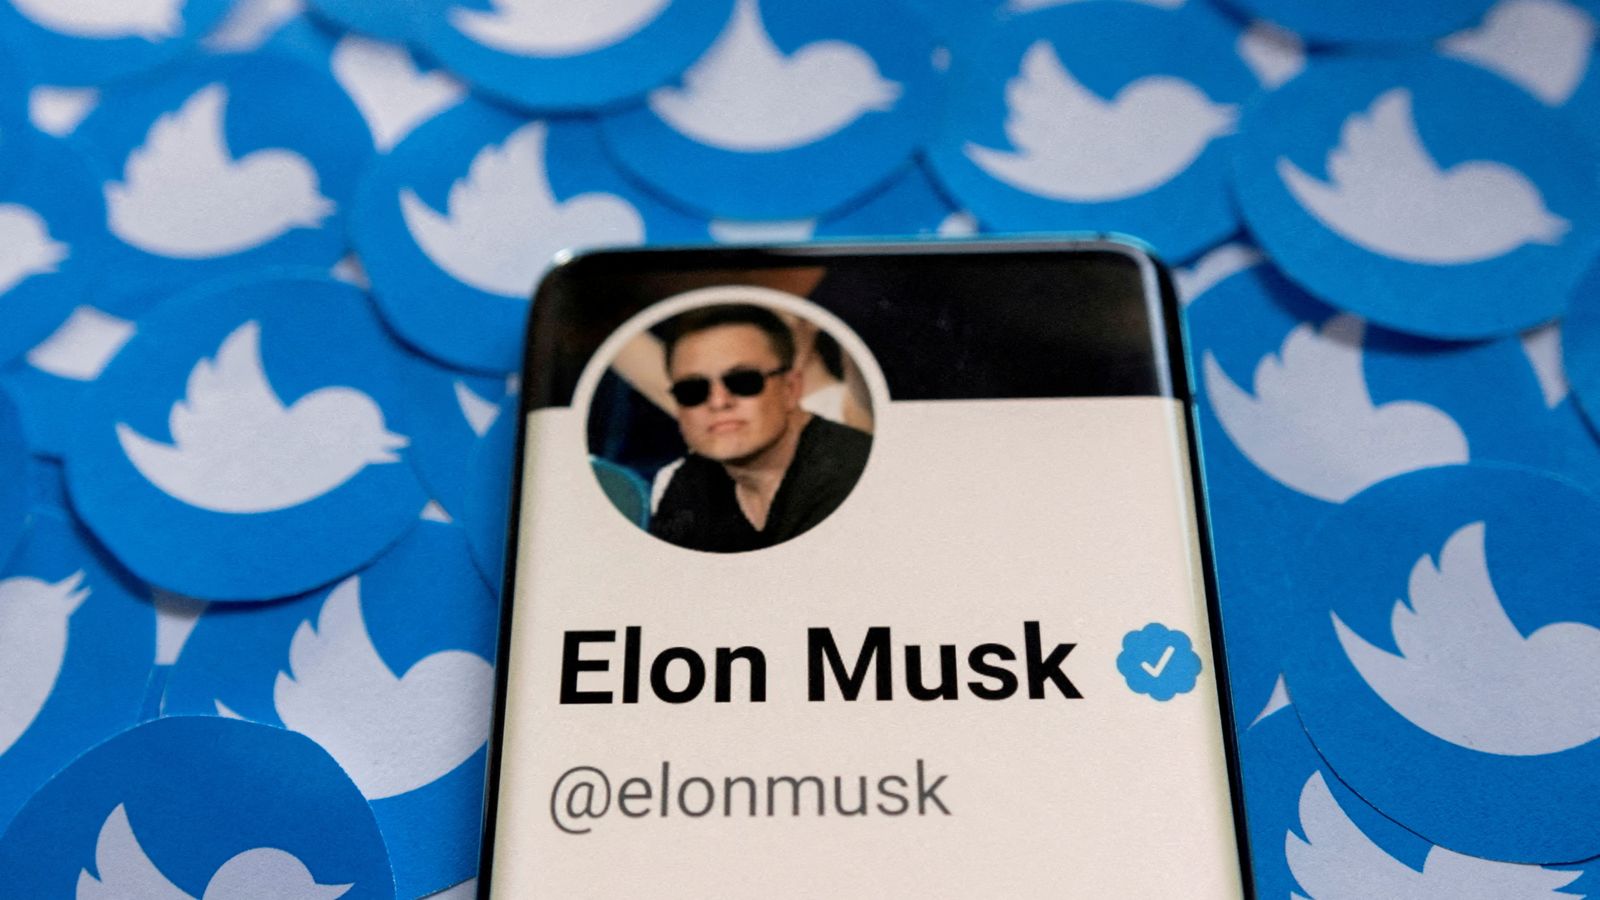 Elon Musk says Twitter has to show spam accounts less than 5% for takeover to go ahead